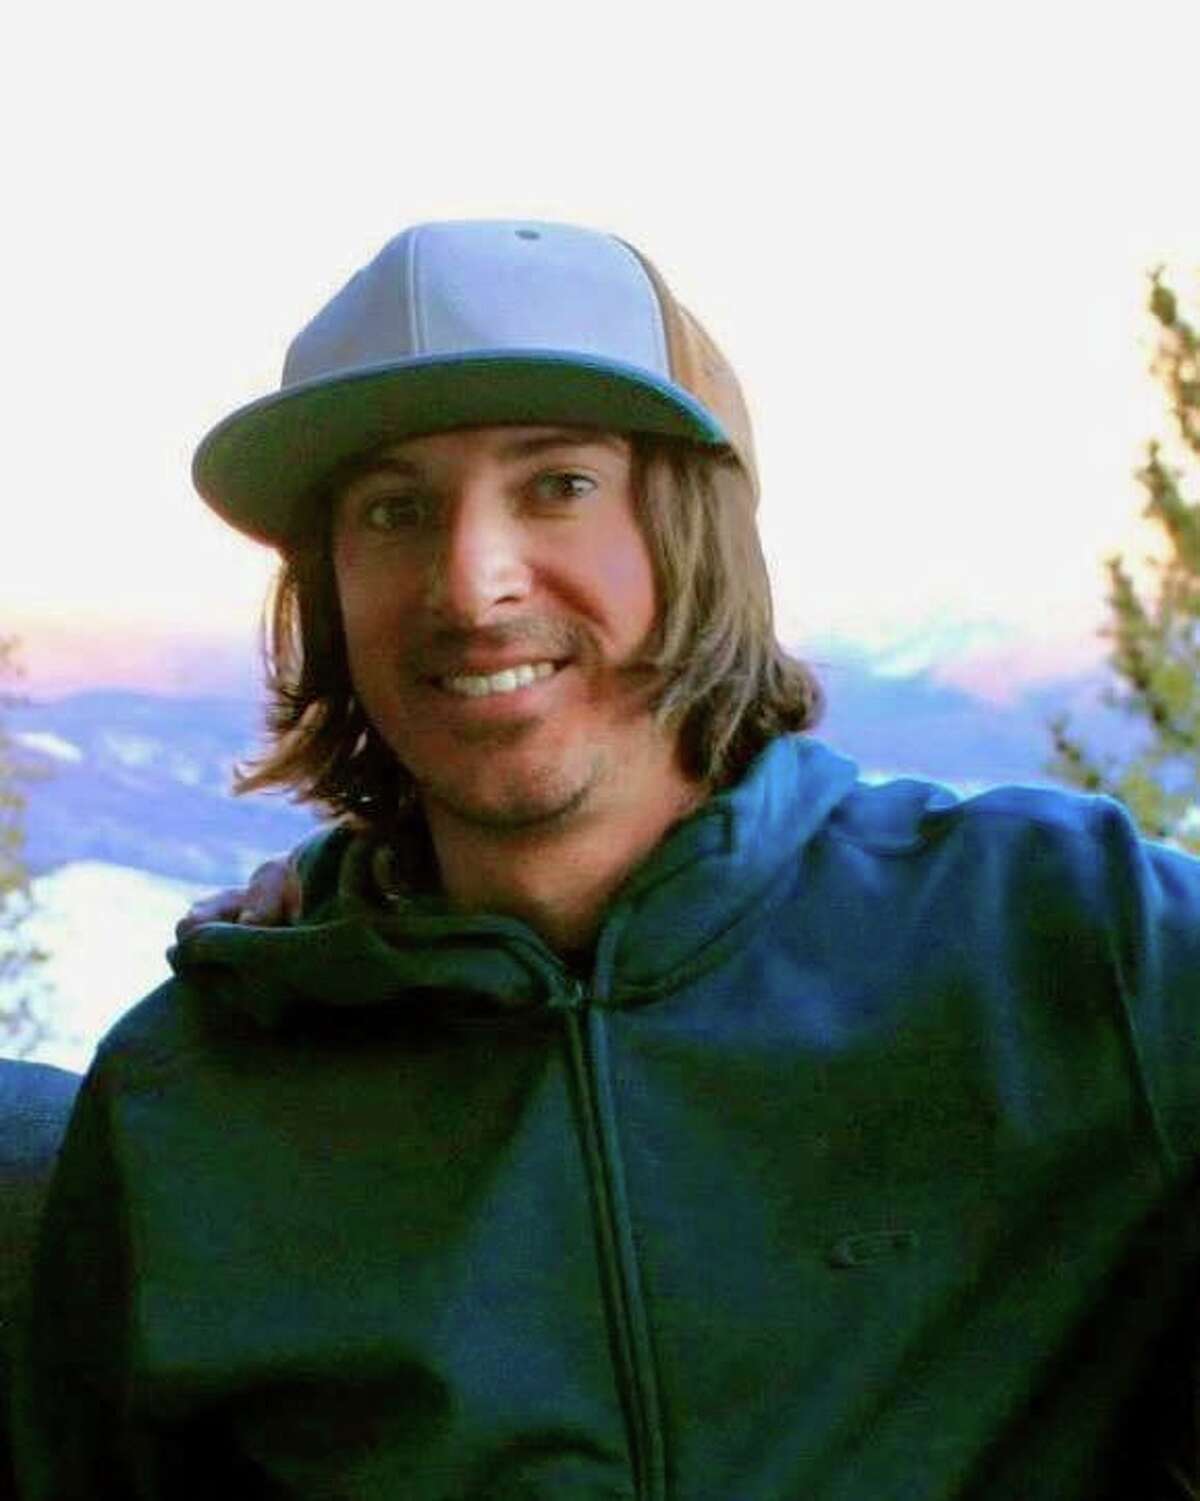 A photo of Rory Angelotta, who went missing at Northstar, provided to authorities. Rescue search operations for Angelotta, who went missing at Northstar California Resort during a blizzard on Christmas Day, are being suspended, with authorities saying there is “no realistic possibility” he could have survived the severe storm conditions in the Sierra.